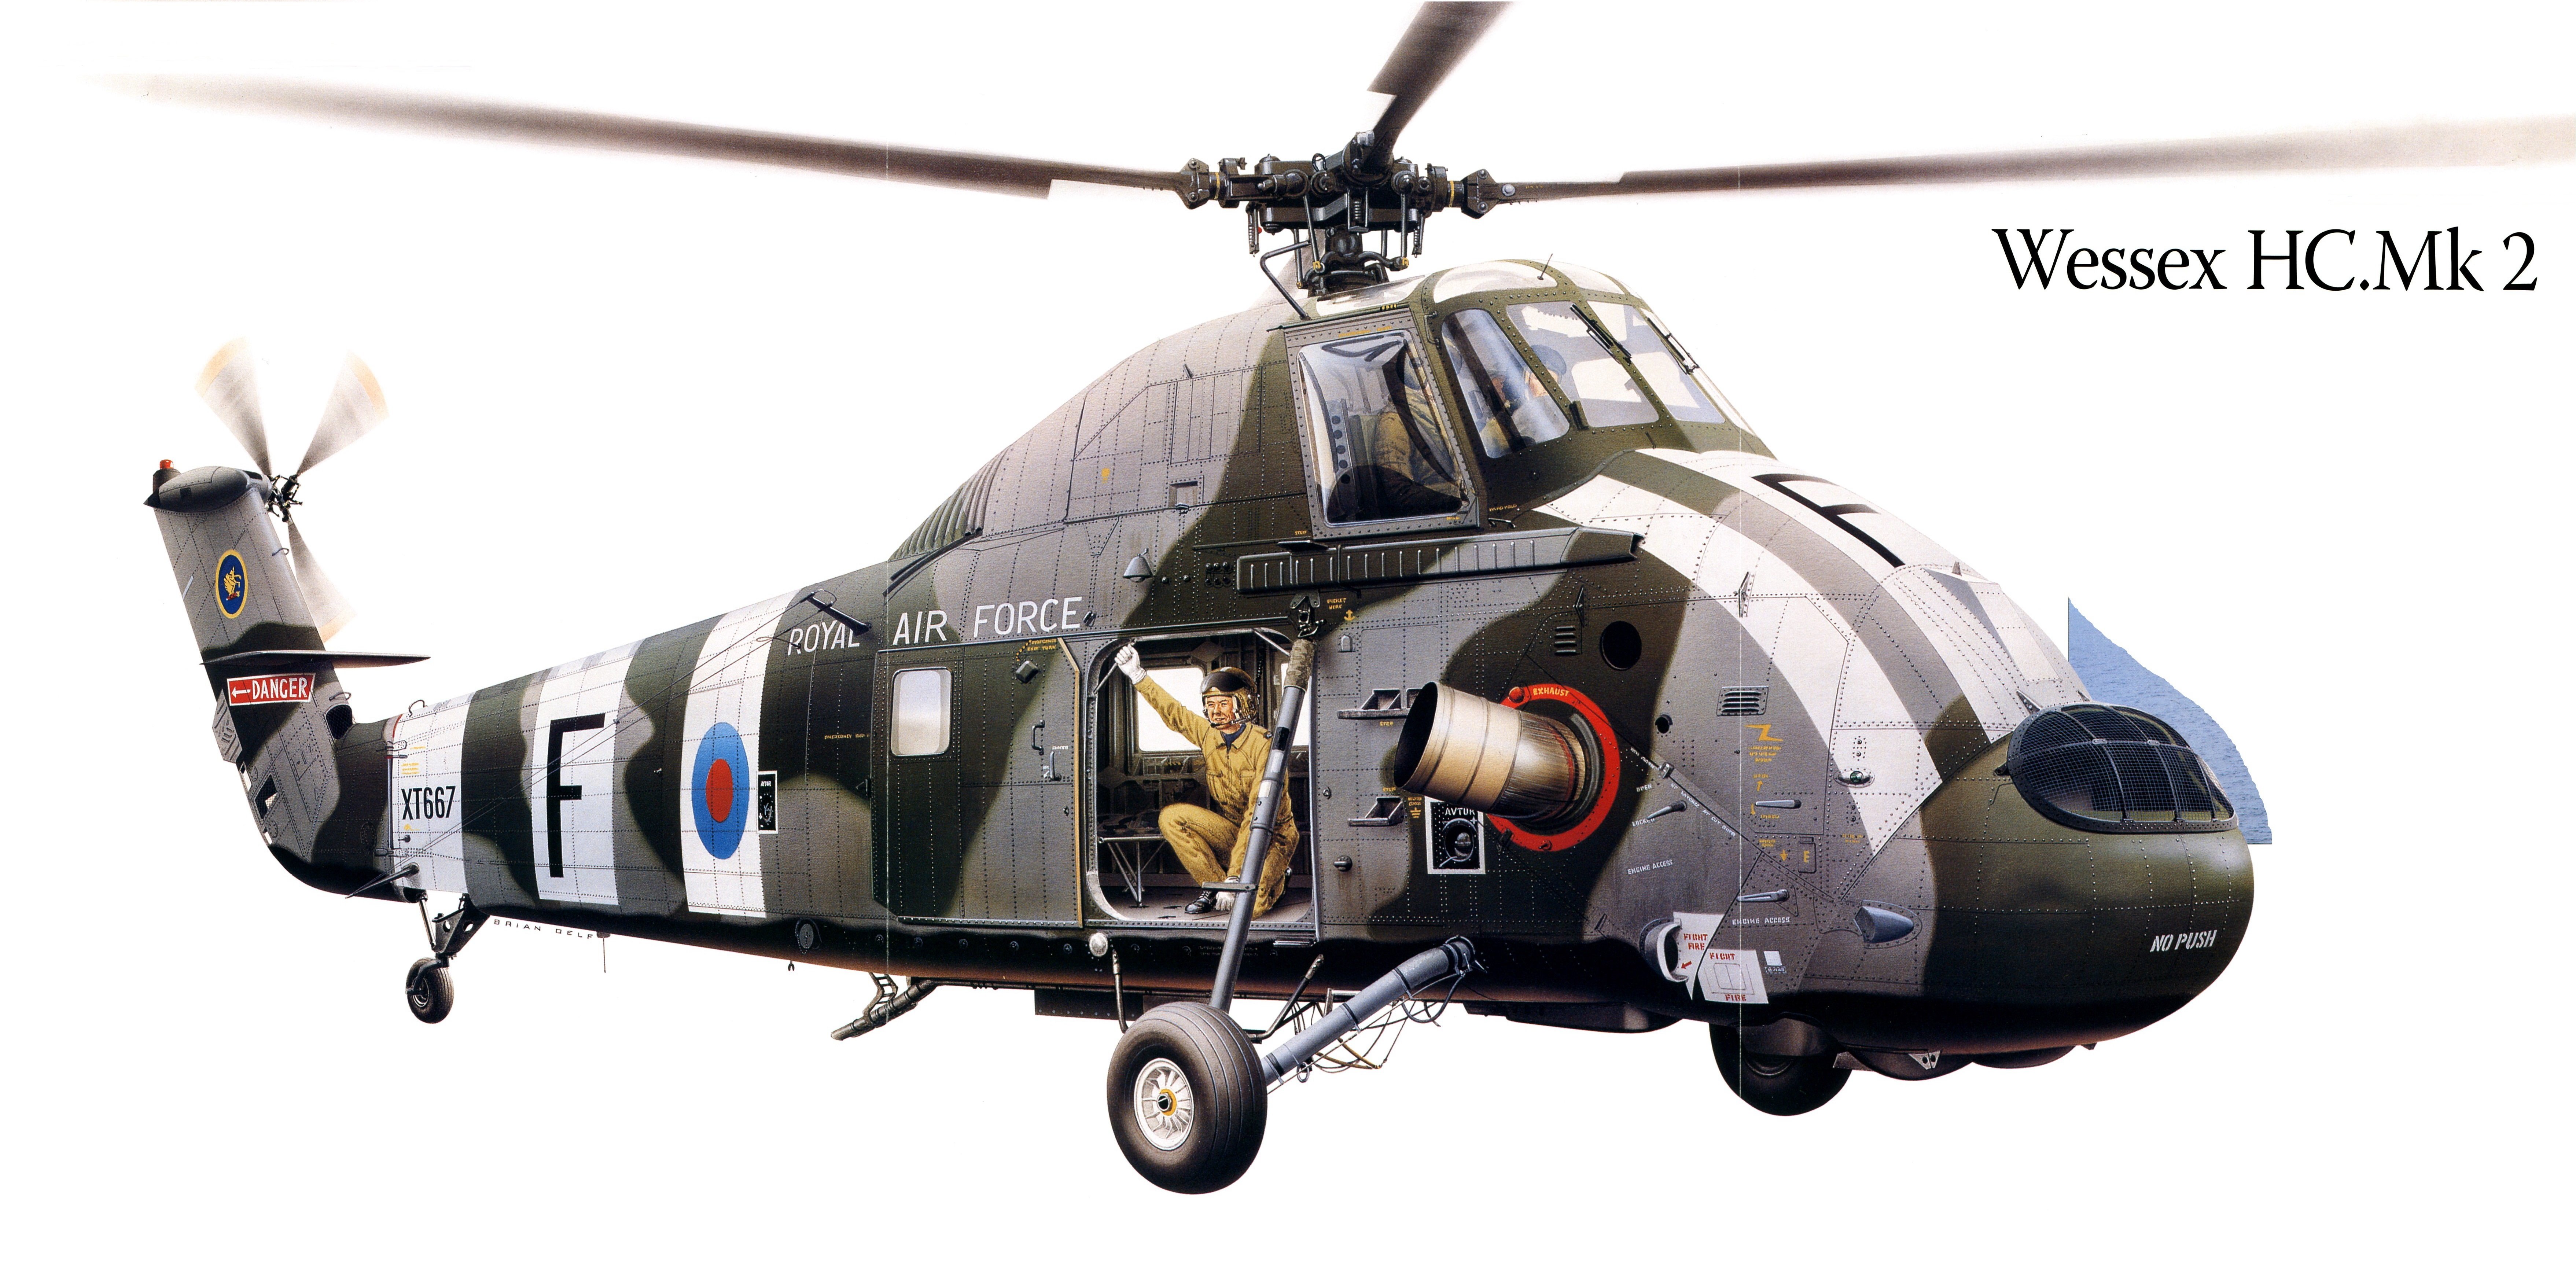 wessex, Hcmk2, Military, Helicopter, Aircraft Wallpaper